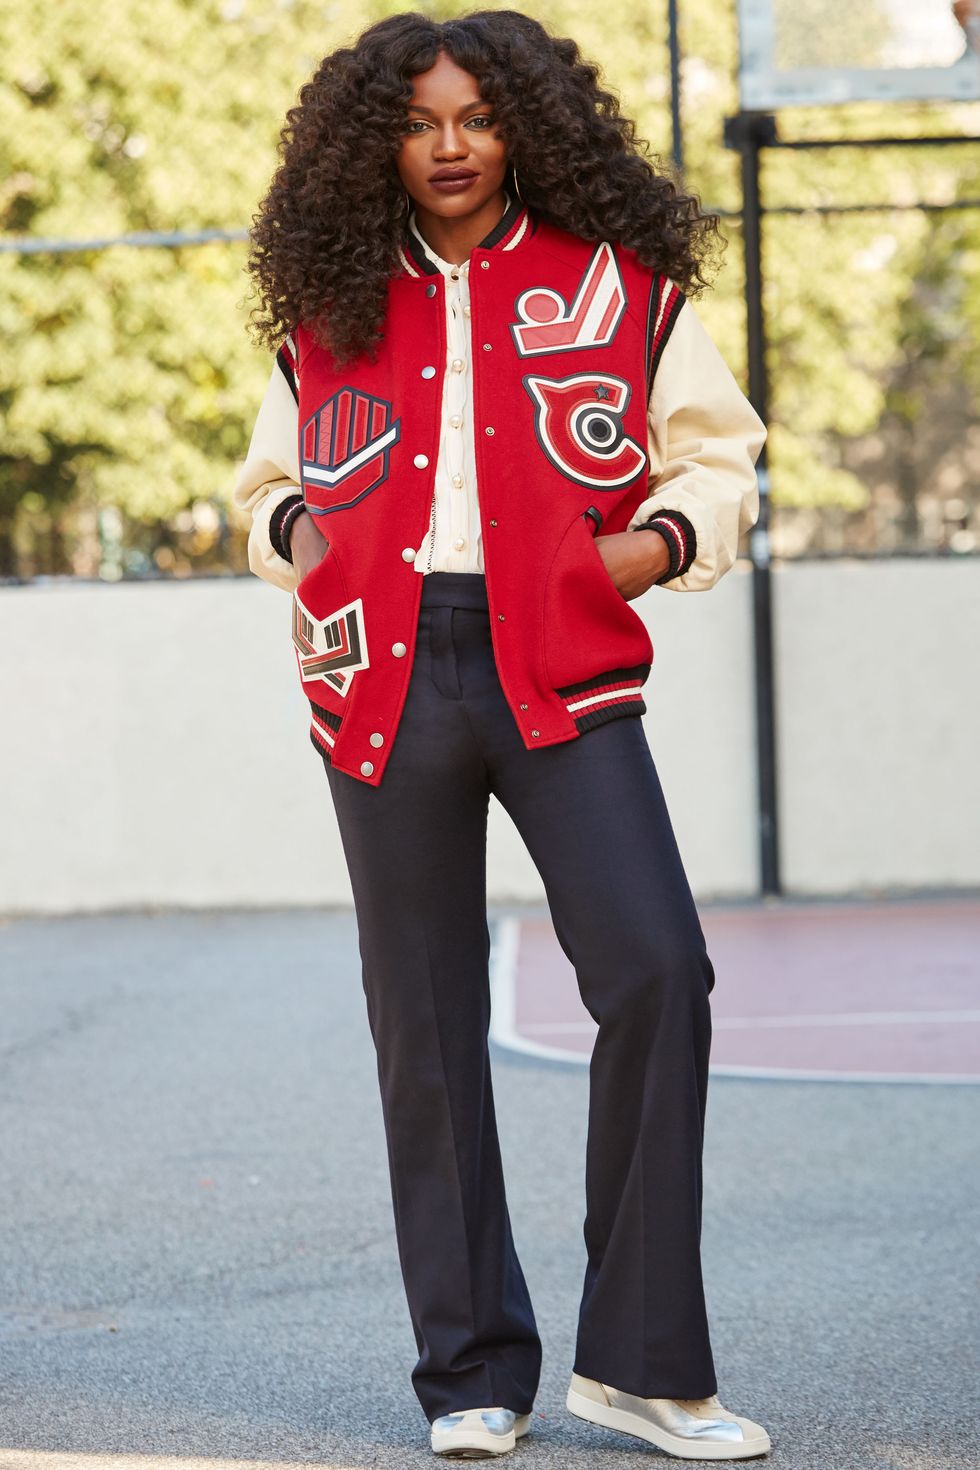 <p>For a touch of nostalgia, pair straight-leg trousers with sneakers. "It's a combo I call 'tomgirl-chic,'" explains Gold. "It reminds me of my glory days in high school when I played basketball, but it's actually timeless—you can wear this look forever." Up the femme factor by choosing a blouse with pretty details, like pearly buttons. "I love pearls. They're simple and elegant and&nbsp;go with everything."
</p><p><br>
</p><p><em data-redactor-tag="em">Coach <em data-redactor-tag="em">1941 </em><span class="redactor-invisible-space" data-verified="redactor" data-redactor-tag="span" data-redactor-class="redactor-invisible-space"></span>Oversized Varsity Jacket, $1,195, <a rel="noskim" href="http://www.coach.com/coach-designer-vest-oversized-varsity-jacket/56368.html?CID=D_B_ELL_11729" target="_blank">coach.com</a>;</em><em data-redactor-tag="em"> </em><em data-redactor-tag="em">Coach <em data-redactor-tag="em">1941 </em><span class="redactor-invisible-space" data-verified="redactor" data-redactor-tag="span" data-redactor-class="redactor-invisible-space"></span>Shirt With Ruffle, $450, <a rel="noskim" href="http://www.coach.com/coach-designer-tops-shirt-with-ruffle-/56450.html?CID=D_B_ELL_11730" target="_blank">coach.com</a>; Coach <em data-redactor-tag="em">1941 </em><span class="redactor-invisible-space" data-verified="redactor" data-redactor-tag="span" data-redactor-class="redactor-invisible-space"></span>Tailored Pants, $395, <a rel="noskim" href="http://www.coach.com/coach-designer-pants-tailored-pants/56306.html?CID=D_B_ELL_11731" target="_blank">coach.com</a>; Coach <em data-redactor-tag="em">1941 </em><span class="redactor-invisible-space" data-verified="redactor" data-redactor-tag="span" data-redactor-class="redactor-invisible-space"></span>C213 High Top Sneaker, $350, </em><a rel="noskim" href="http://www.coach.com/coach-designer-sneakers-c213-high-top-sneaker/Q8922.html?CID=D_B_ELL_11732" target="_blank"><em data-redactor-tag="em">coach.com</em></a></p>